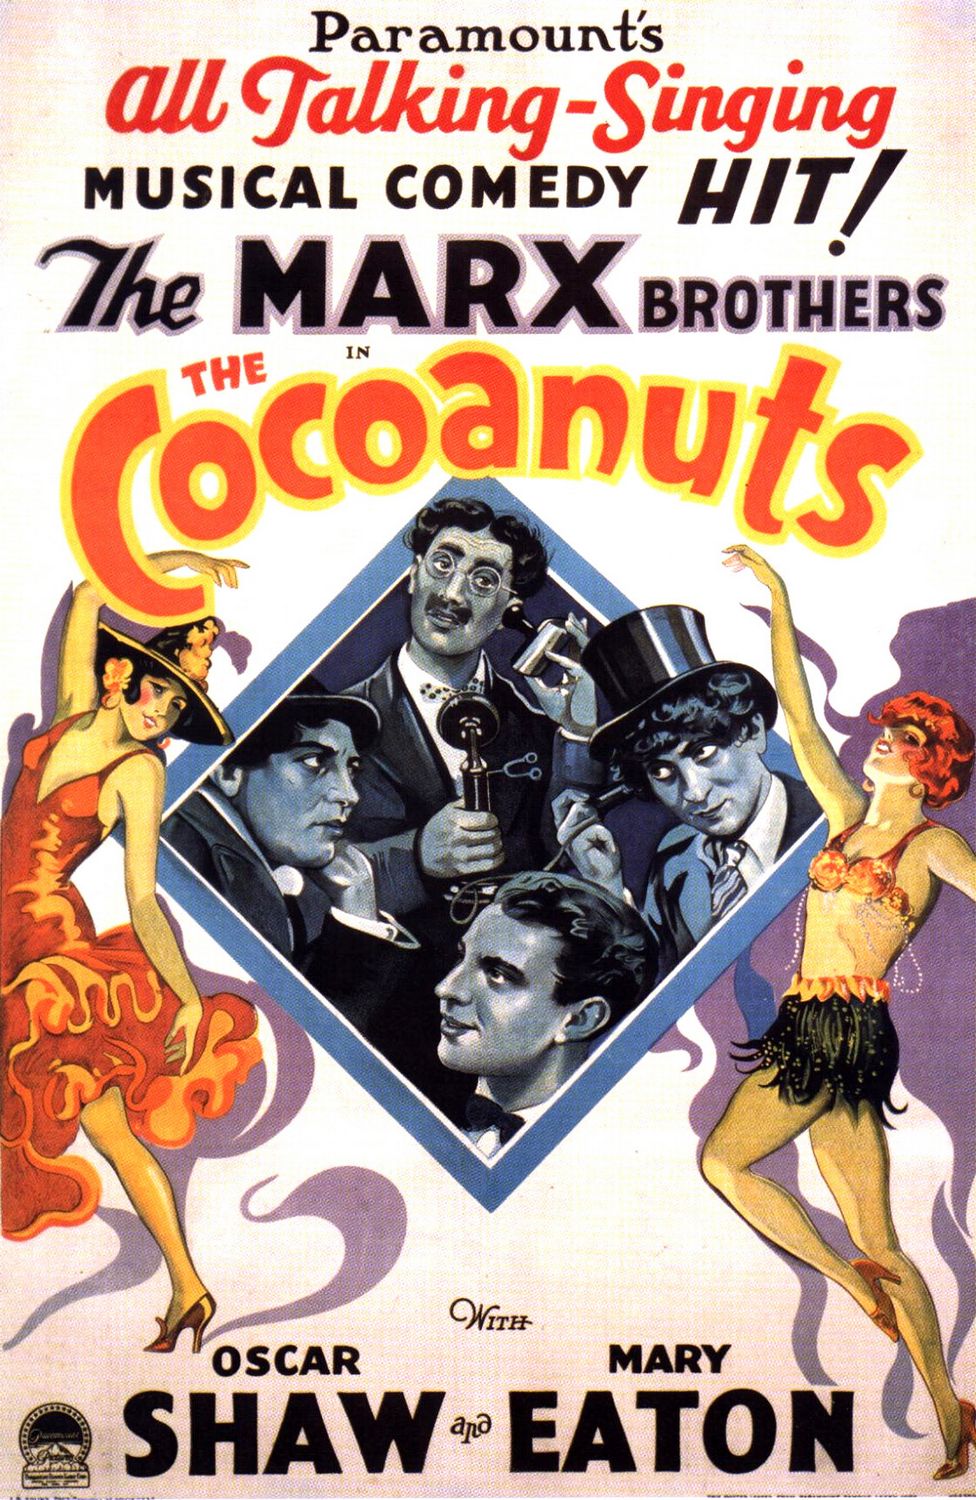 Extra Large Movie Poster Image for Cocoanuts (#1 of 2)